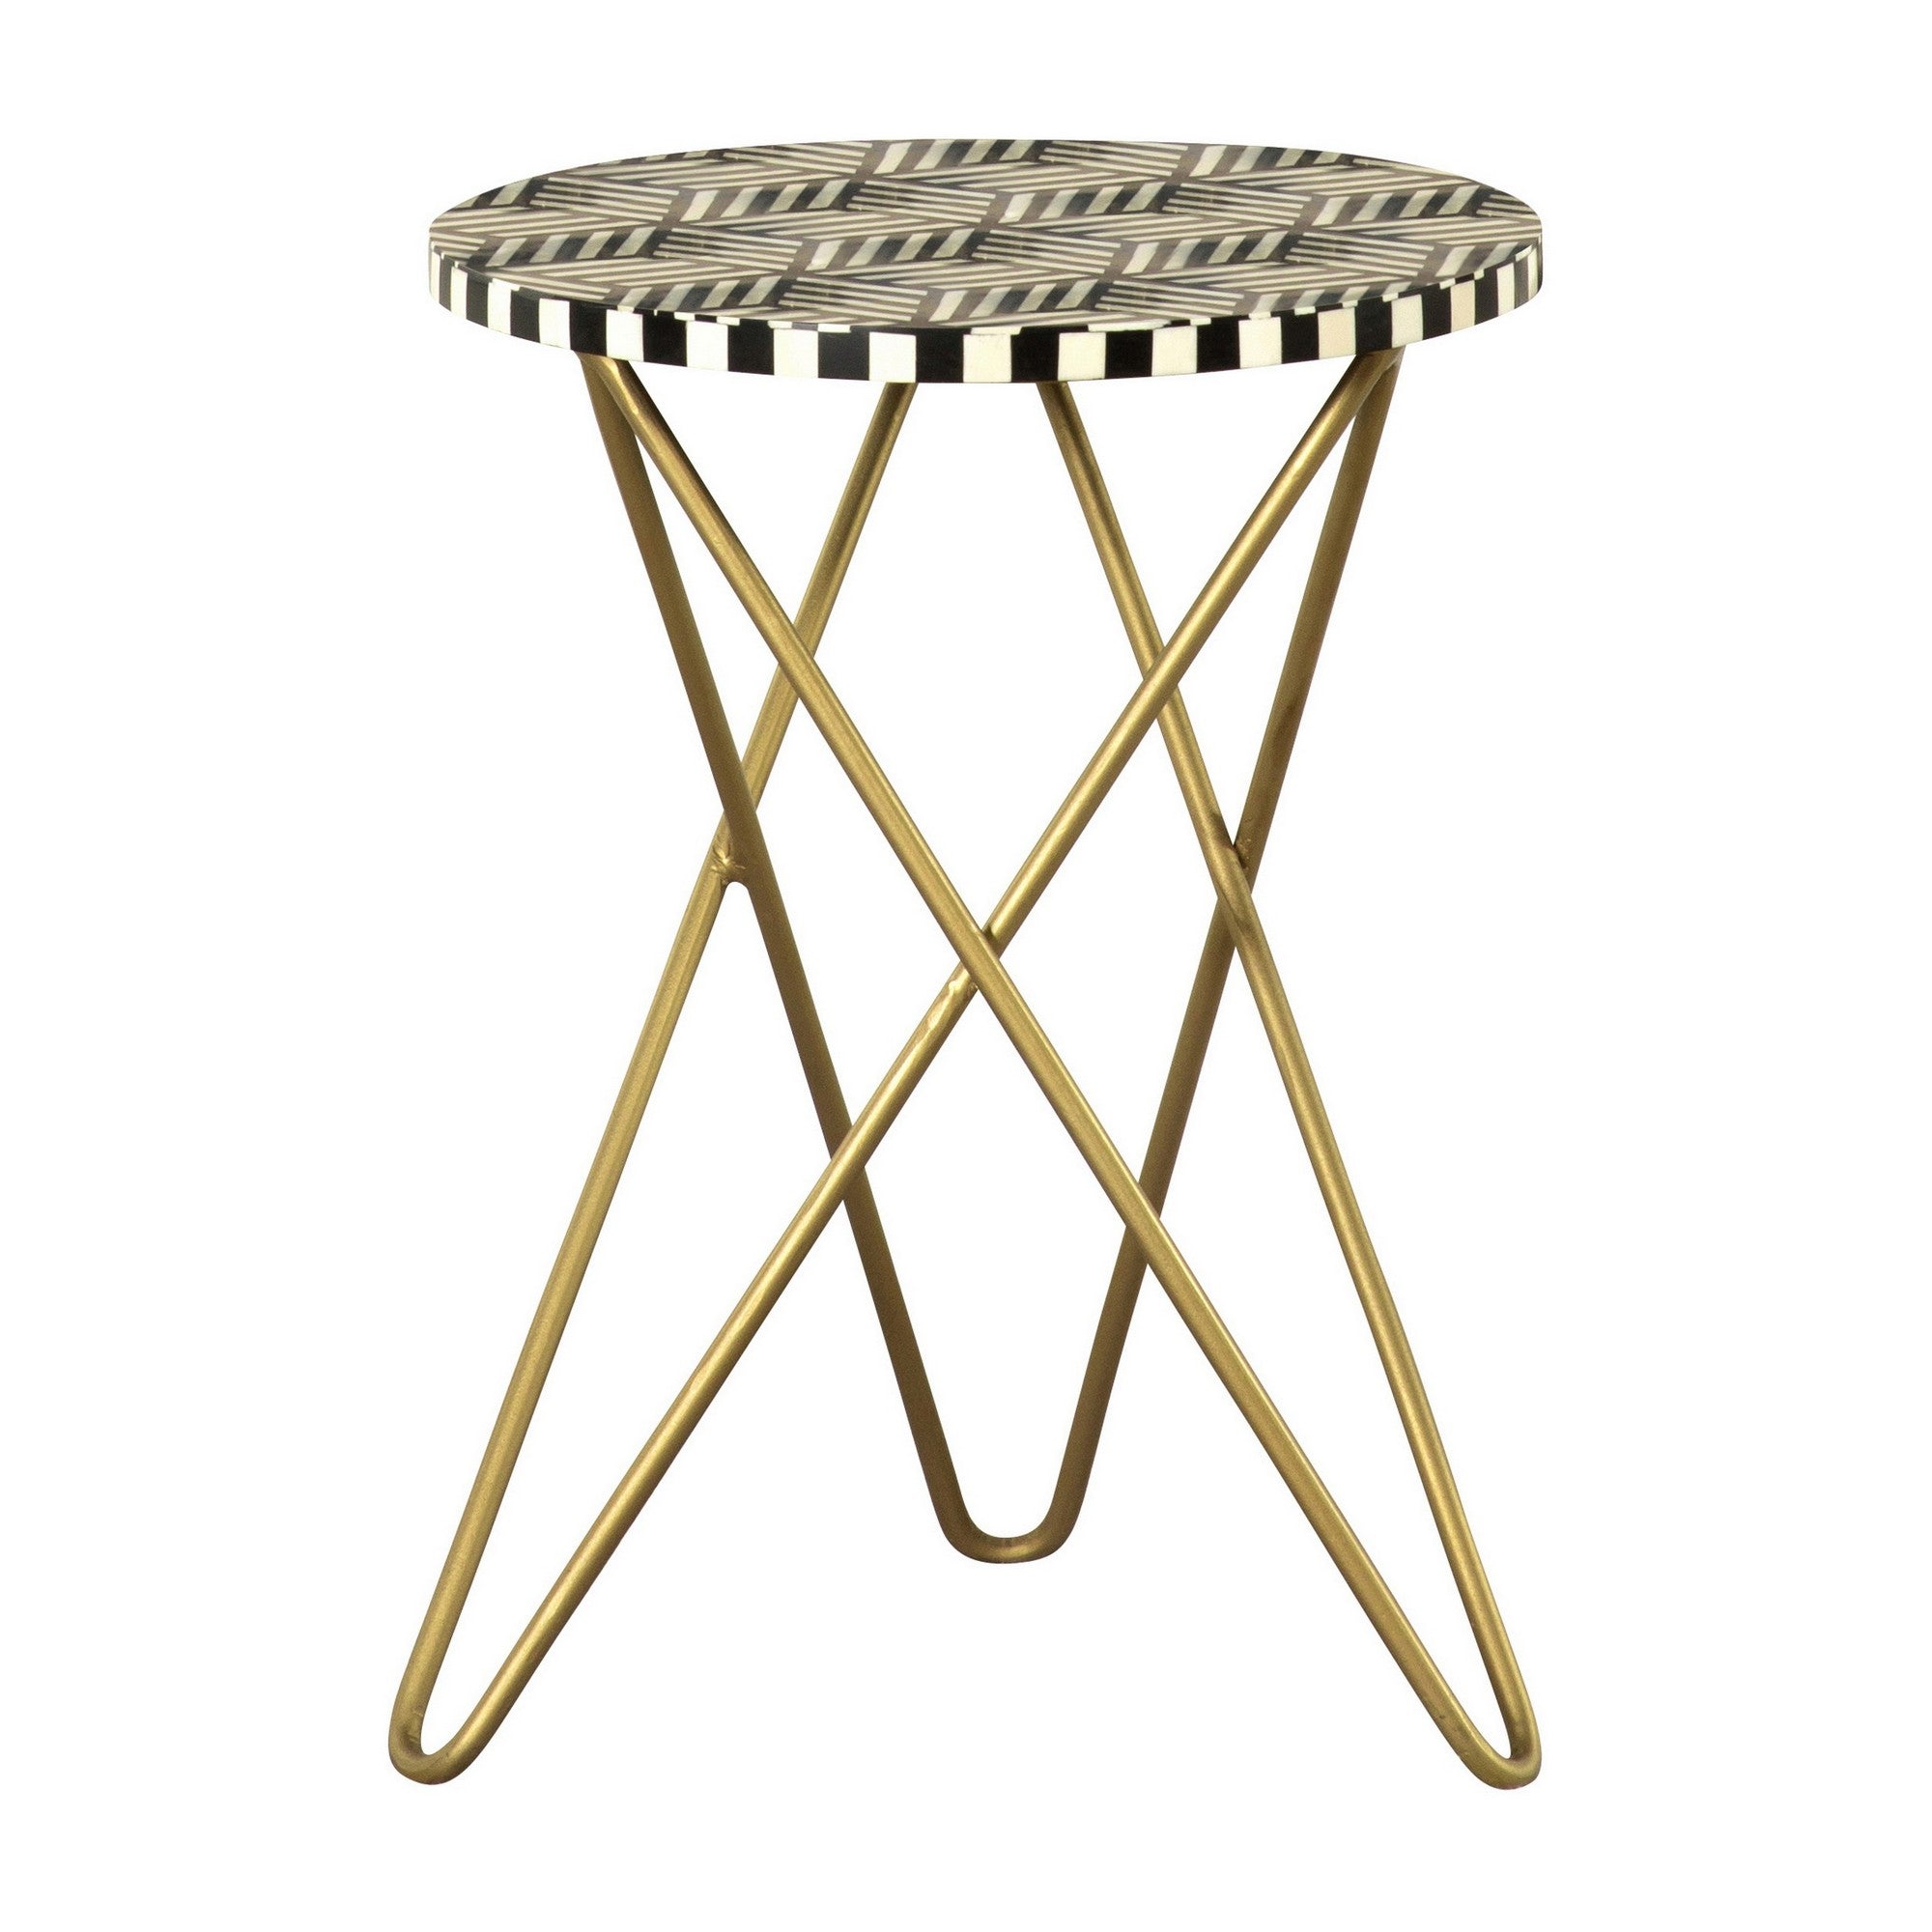 22 Inch Modern Round Accent Table Black And White Inlay Top Gold Legs BM296074 - Benzara